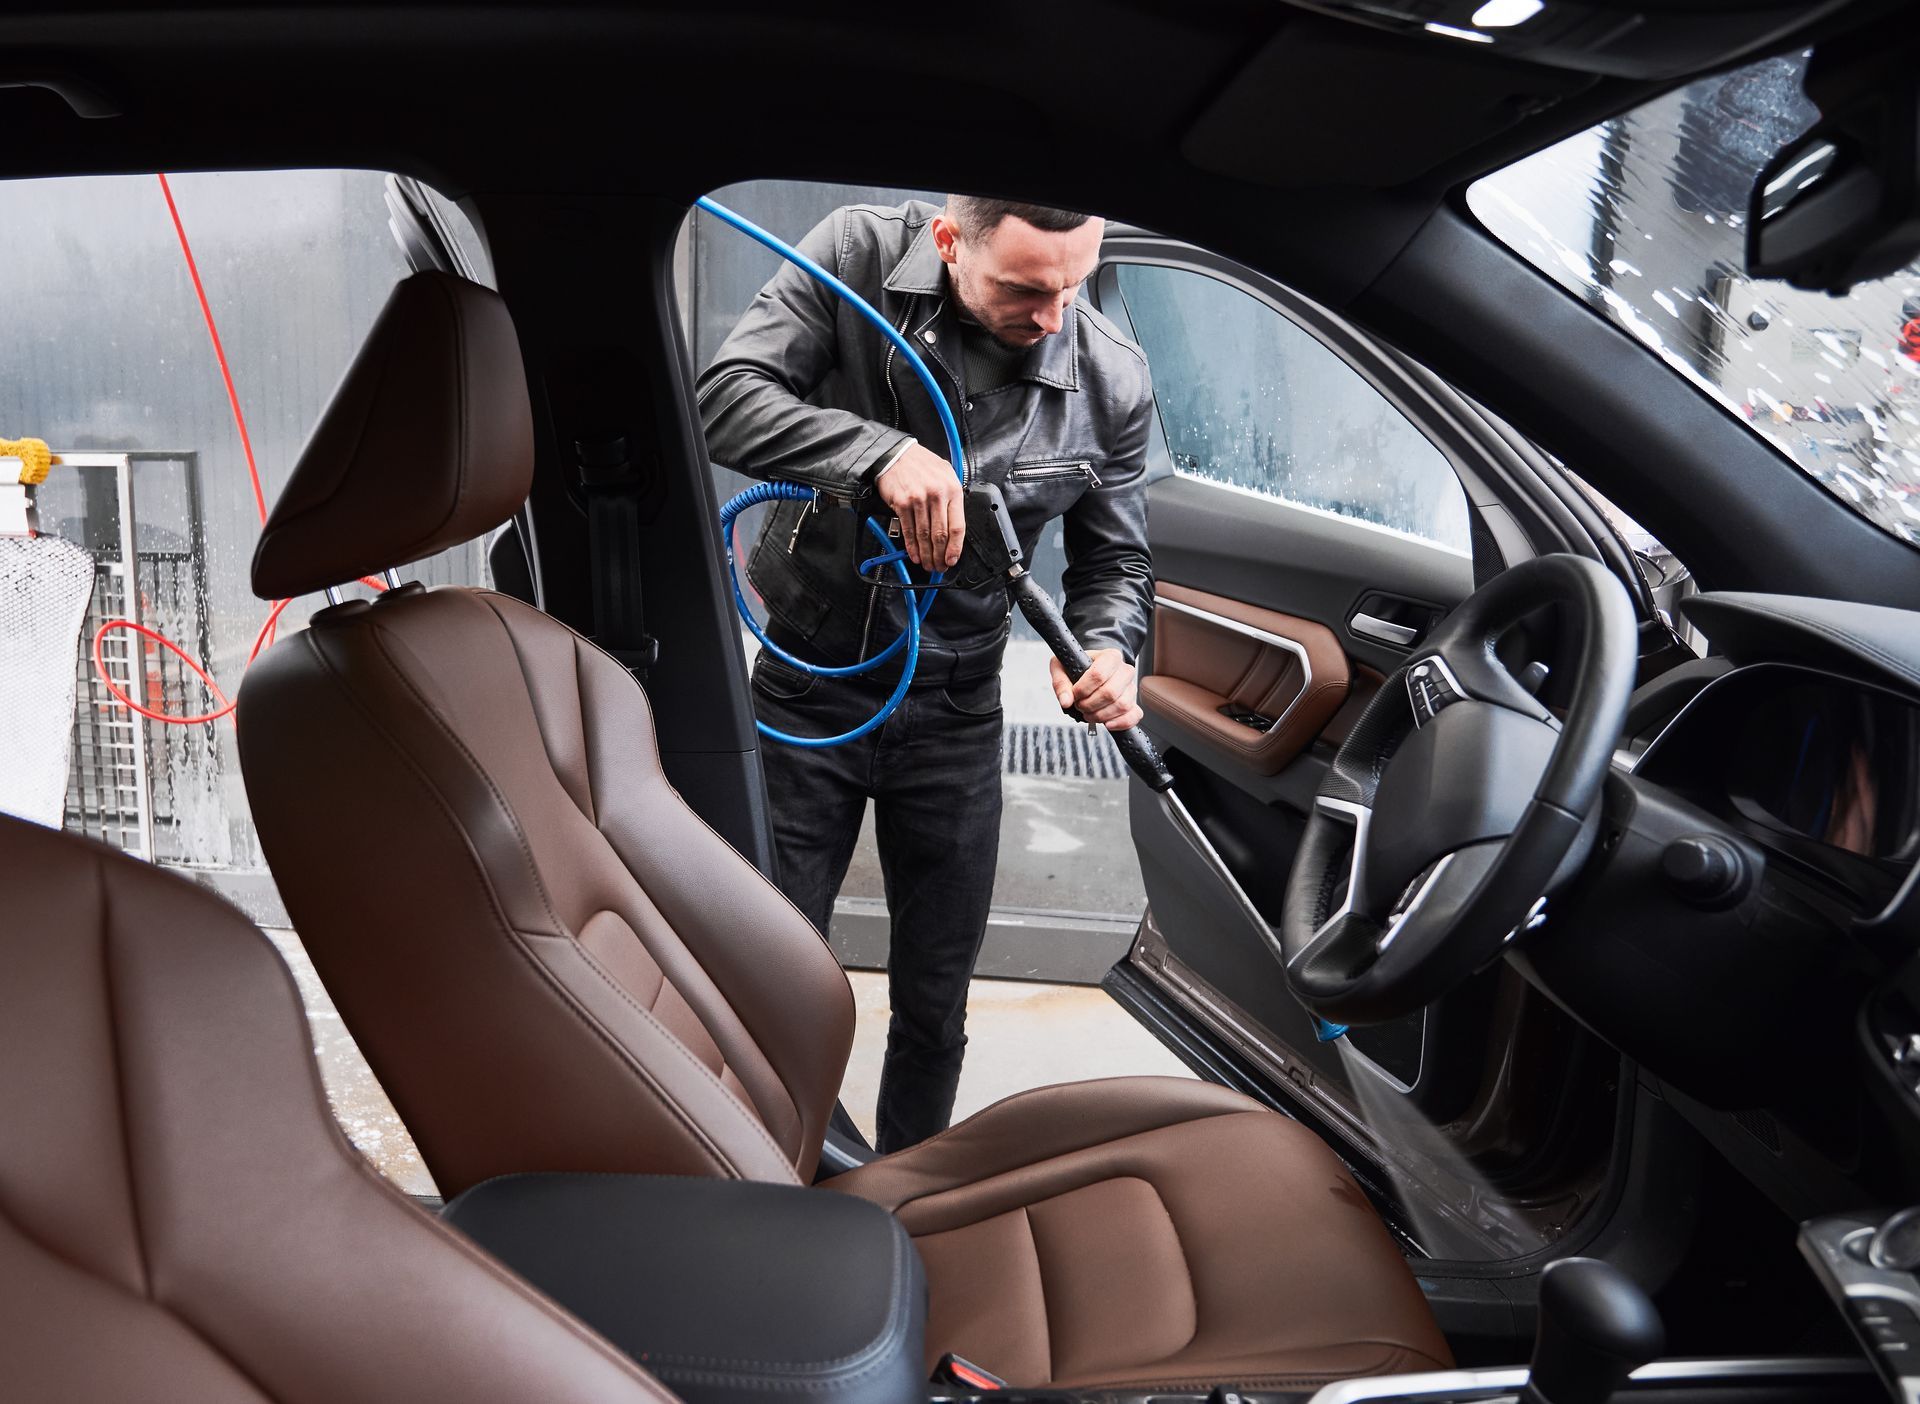 A man is cleaning the interior of a car with a vacuum cleaner.